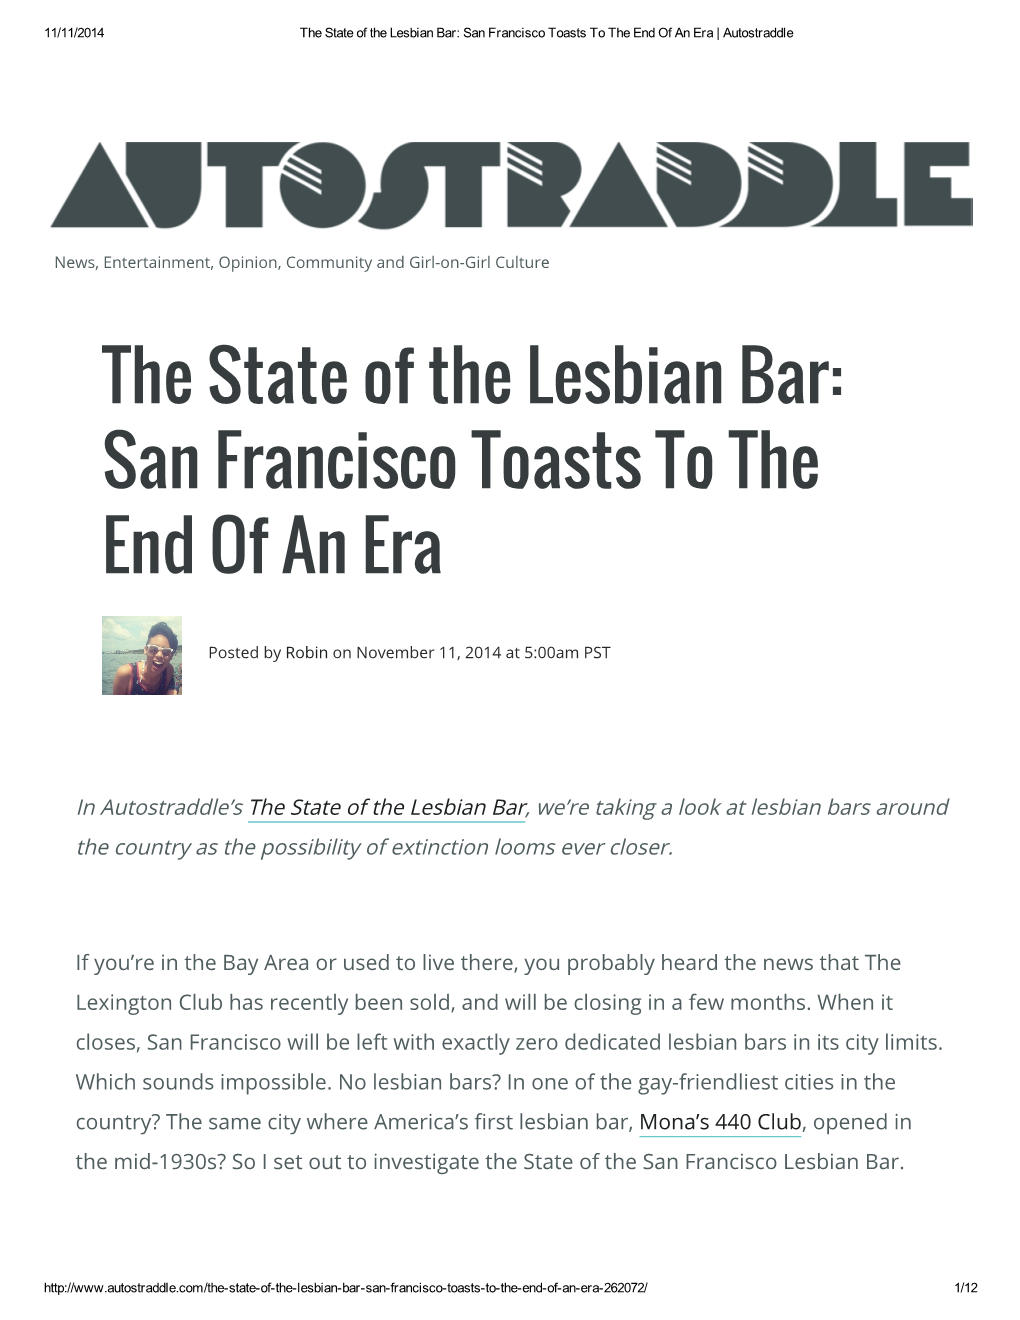 The State of the Lesbian Bar: San Francisco Toasts to the End of an Era | Autostraddle